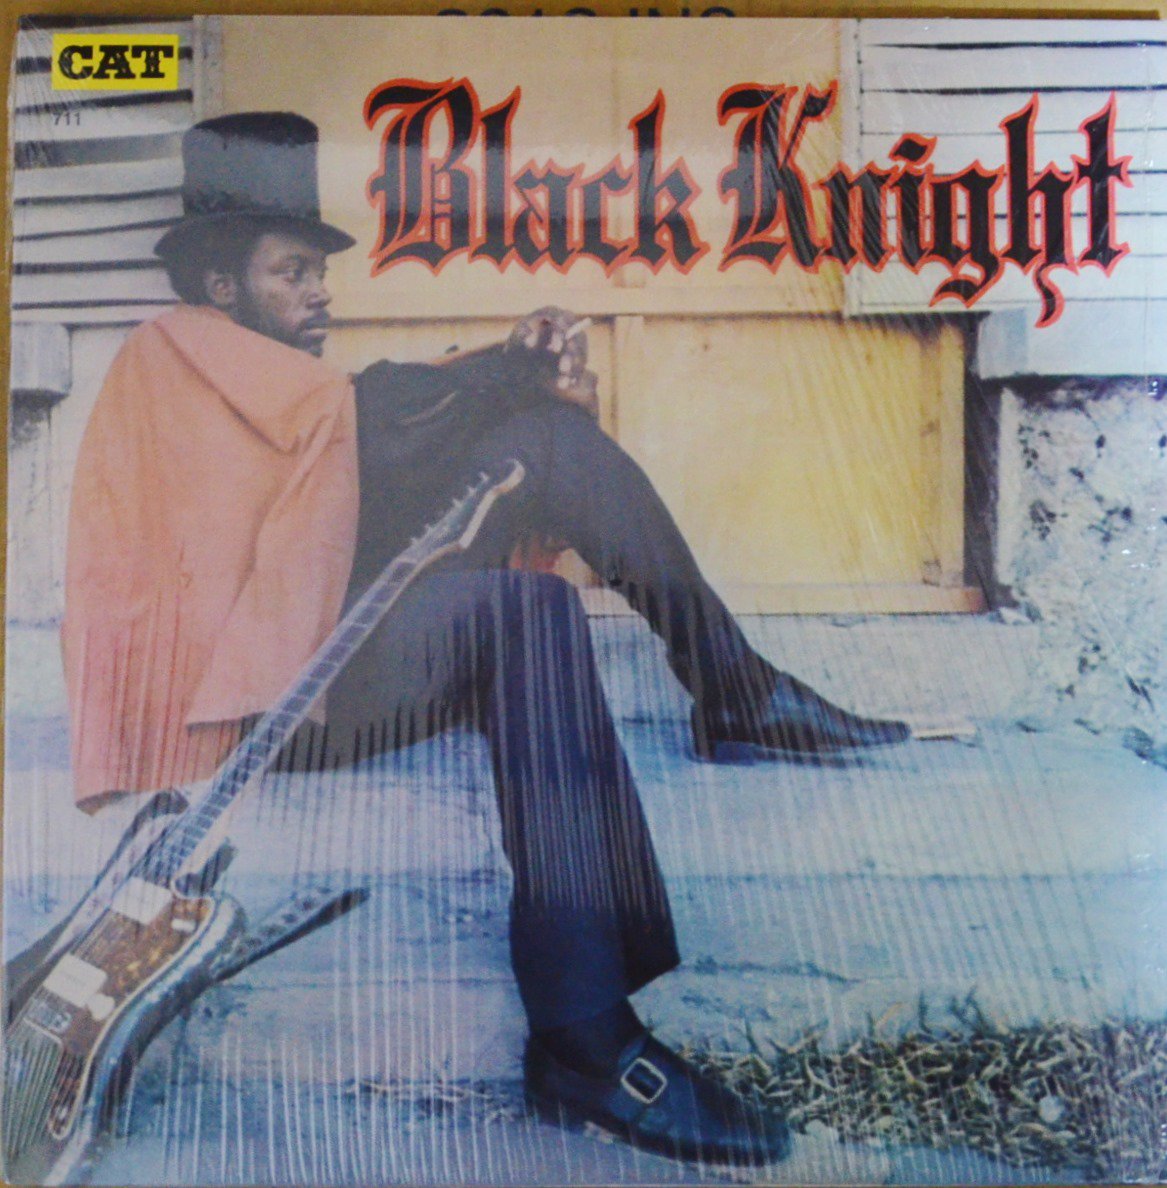 JAMES KNIGHT & THE BUTLERS ‎/ BLACK KNIGHT (LP)